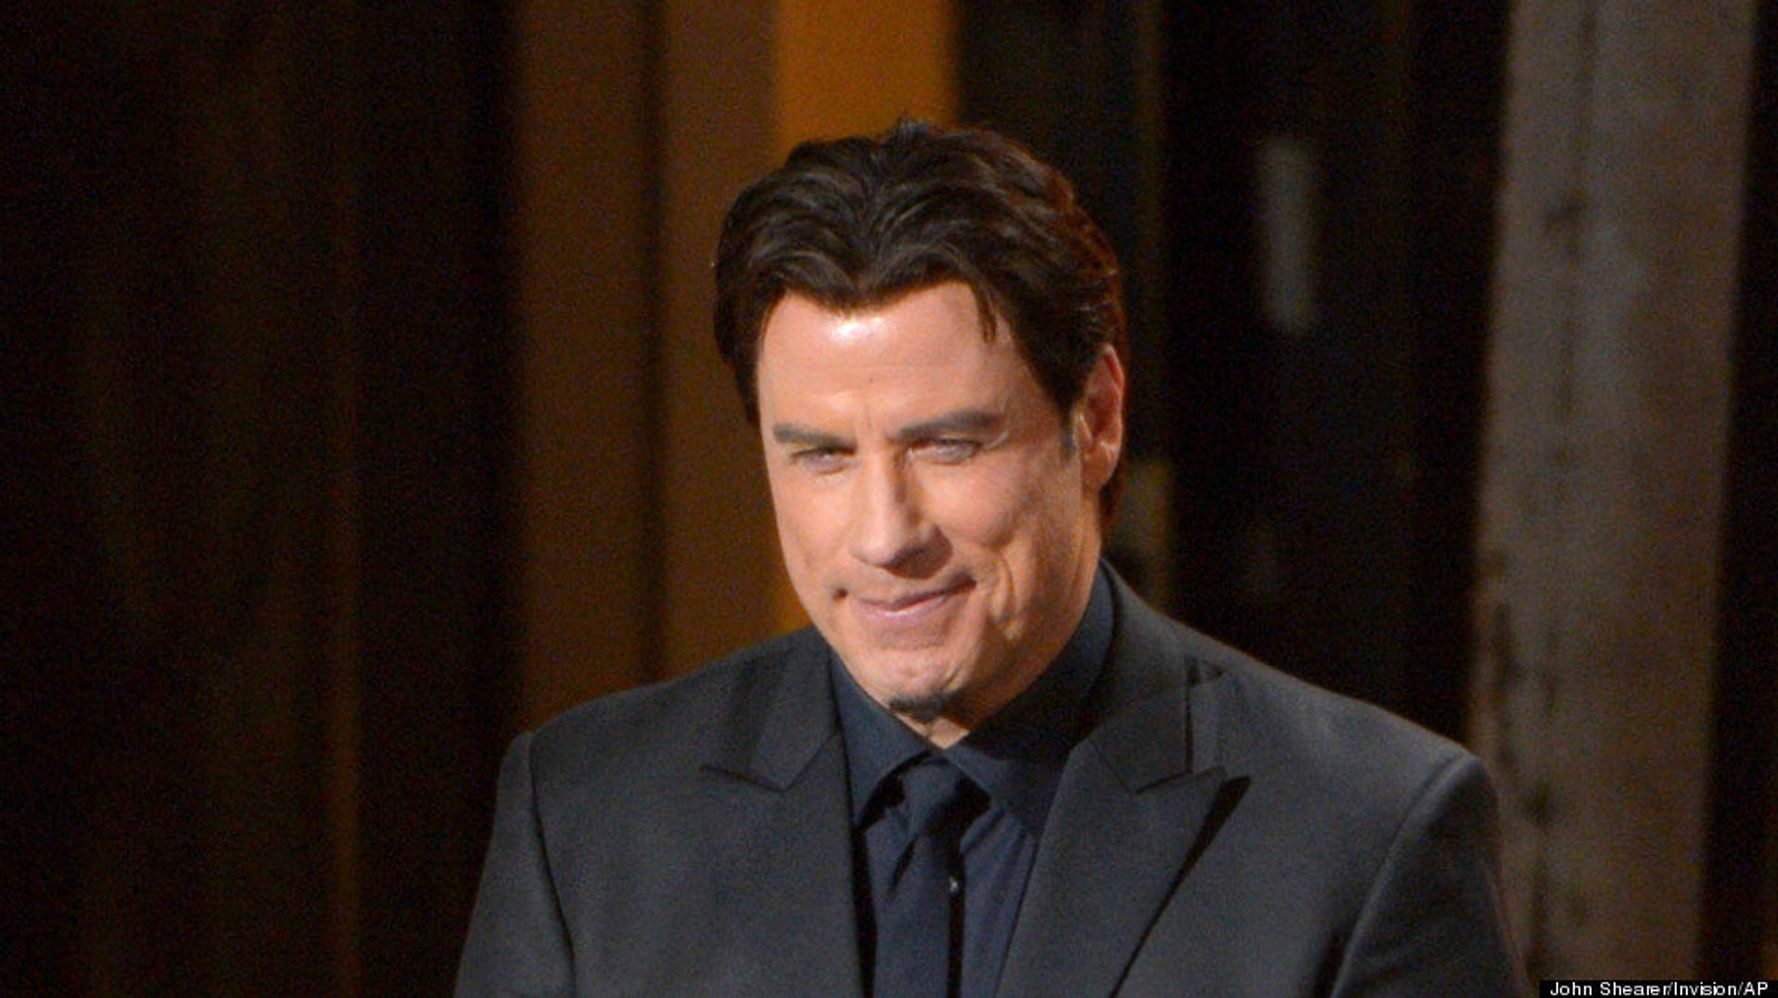 At the Oscars, Travolta and Menzel make light of last year's gaffe